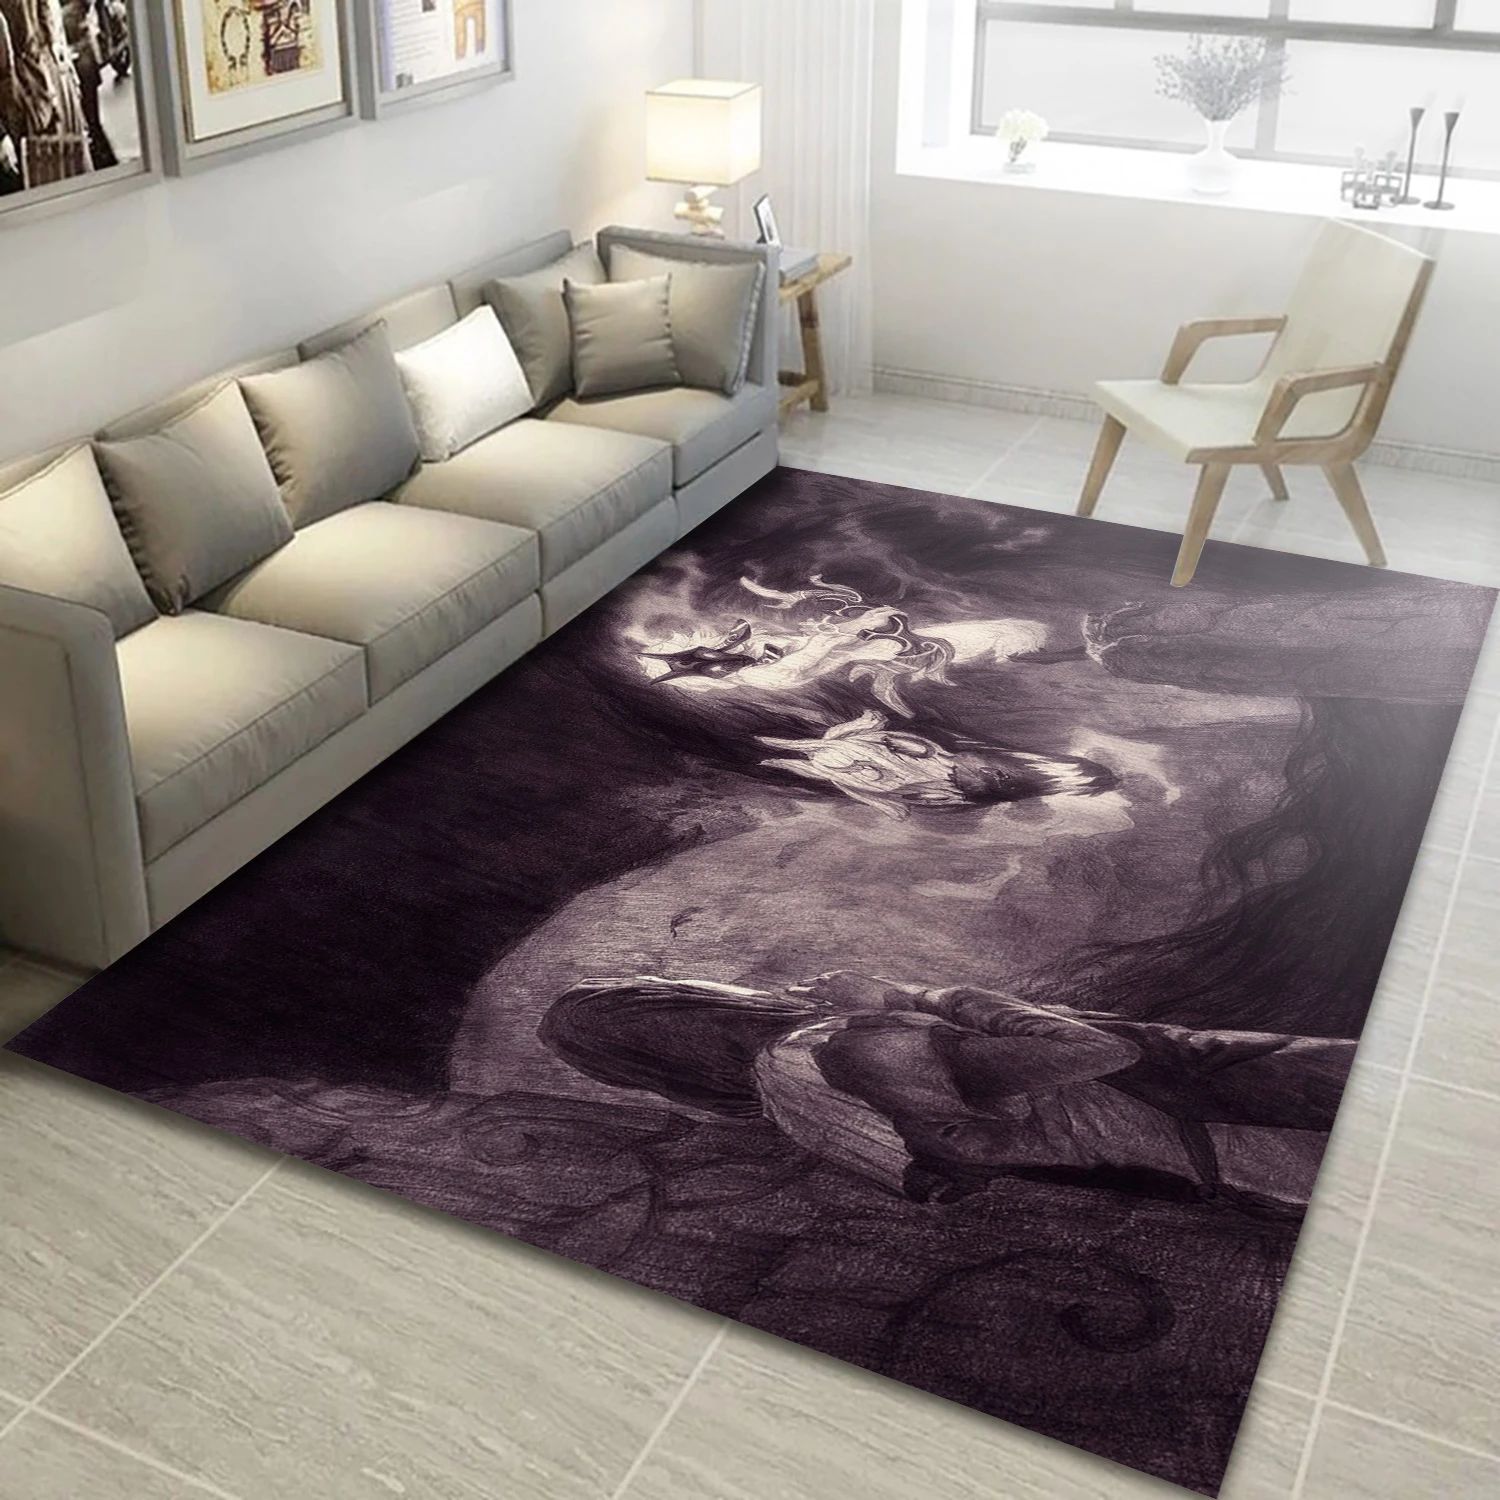 League Of Legends Game Area Rug Carpet, Bedroom Rug - Family Gift US Decor - Indoor Outdoor Rugs 1